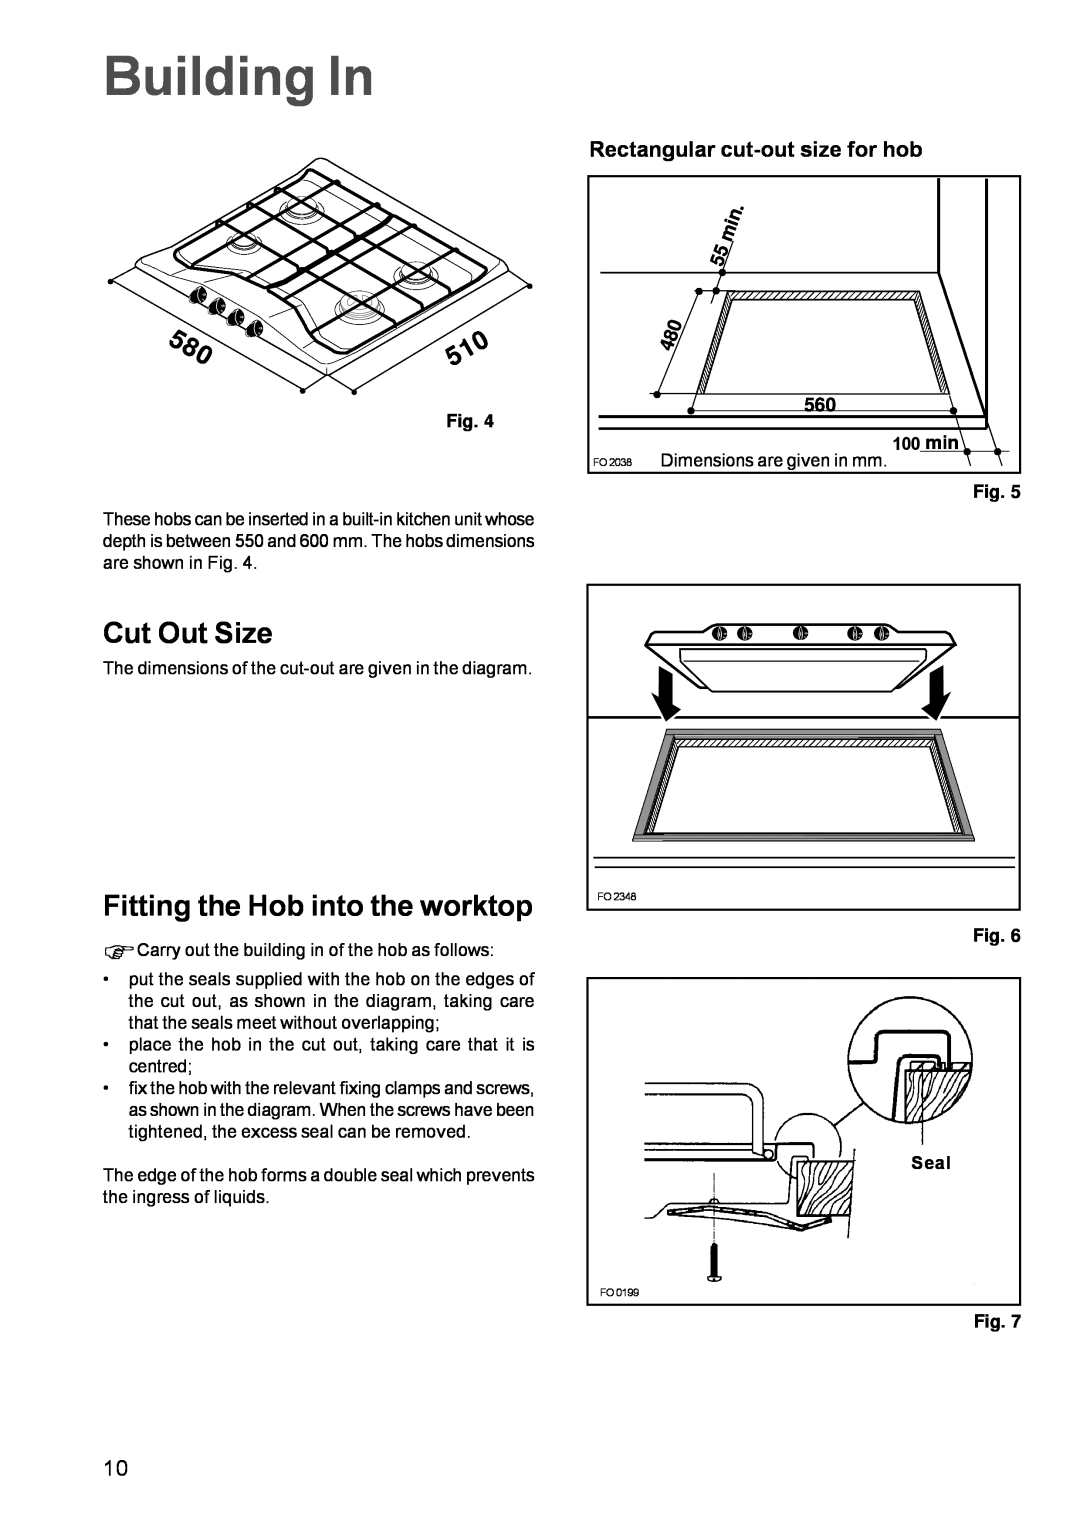 Zanussi ZGF 681 Building In, Cut Out Size, Fitting the Hob into the worktop, Rectangular cut-out size for hob, 560 100 min 